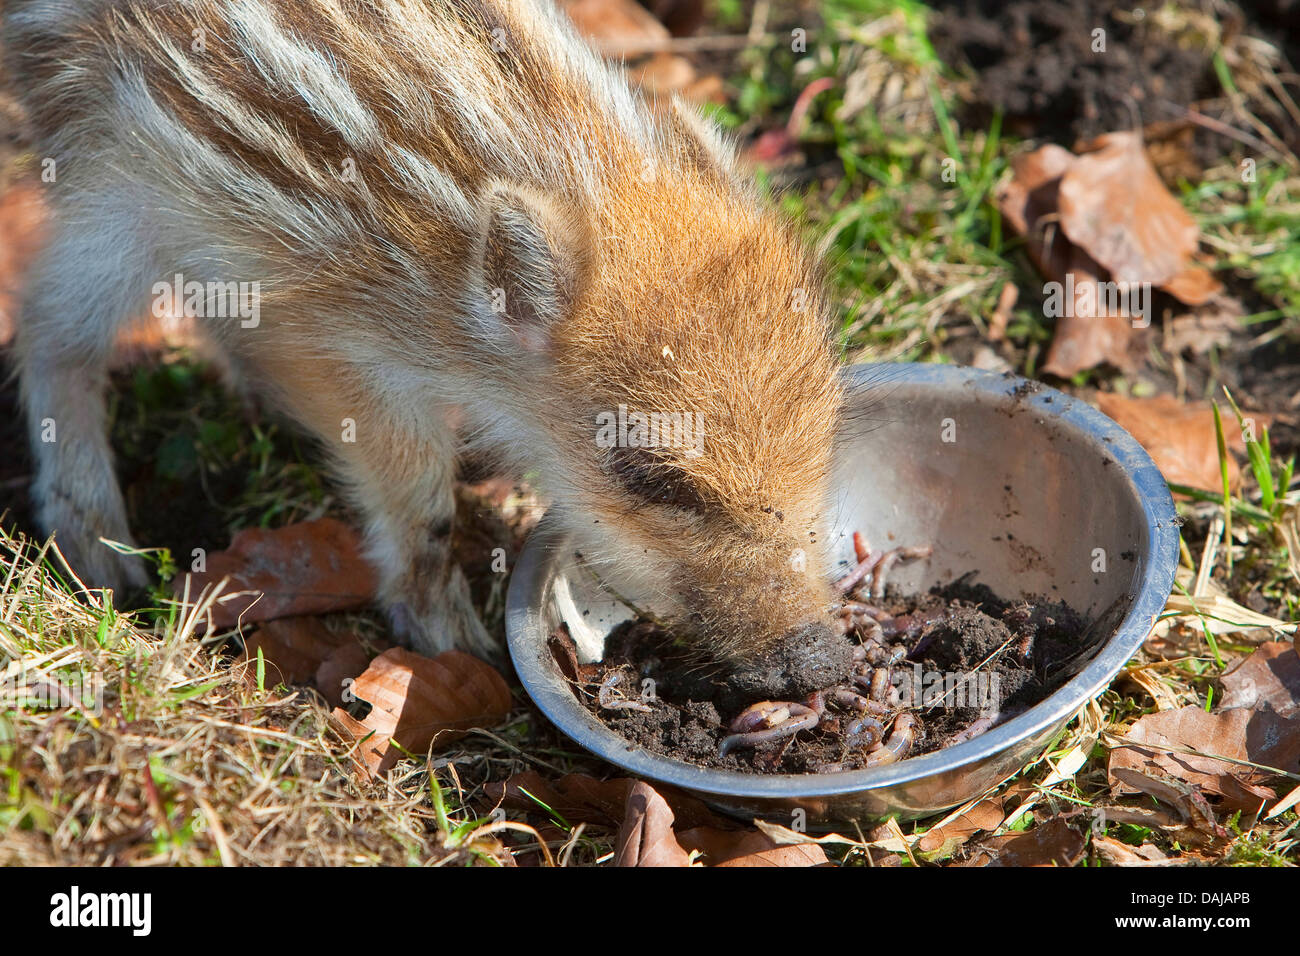 wild boar, pig, wild boar (Sus scrofa), shote feeding earth worms out of a dish, Germany Stock Photo